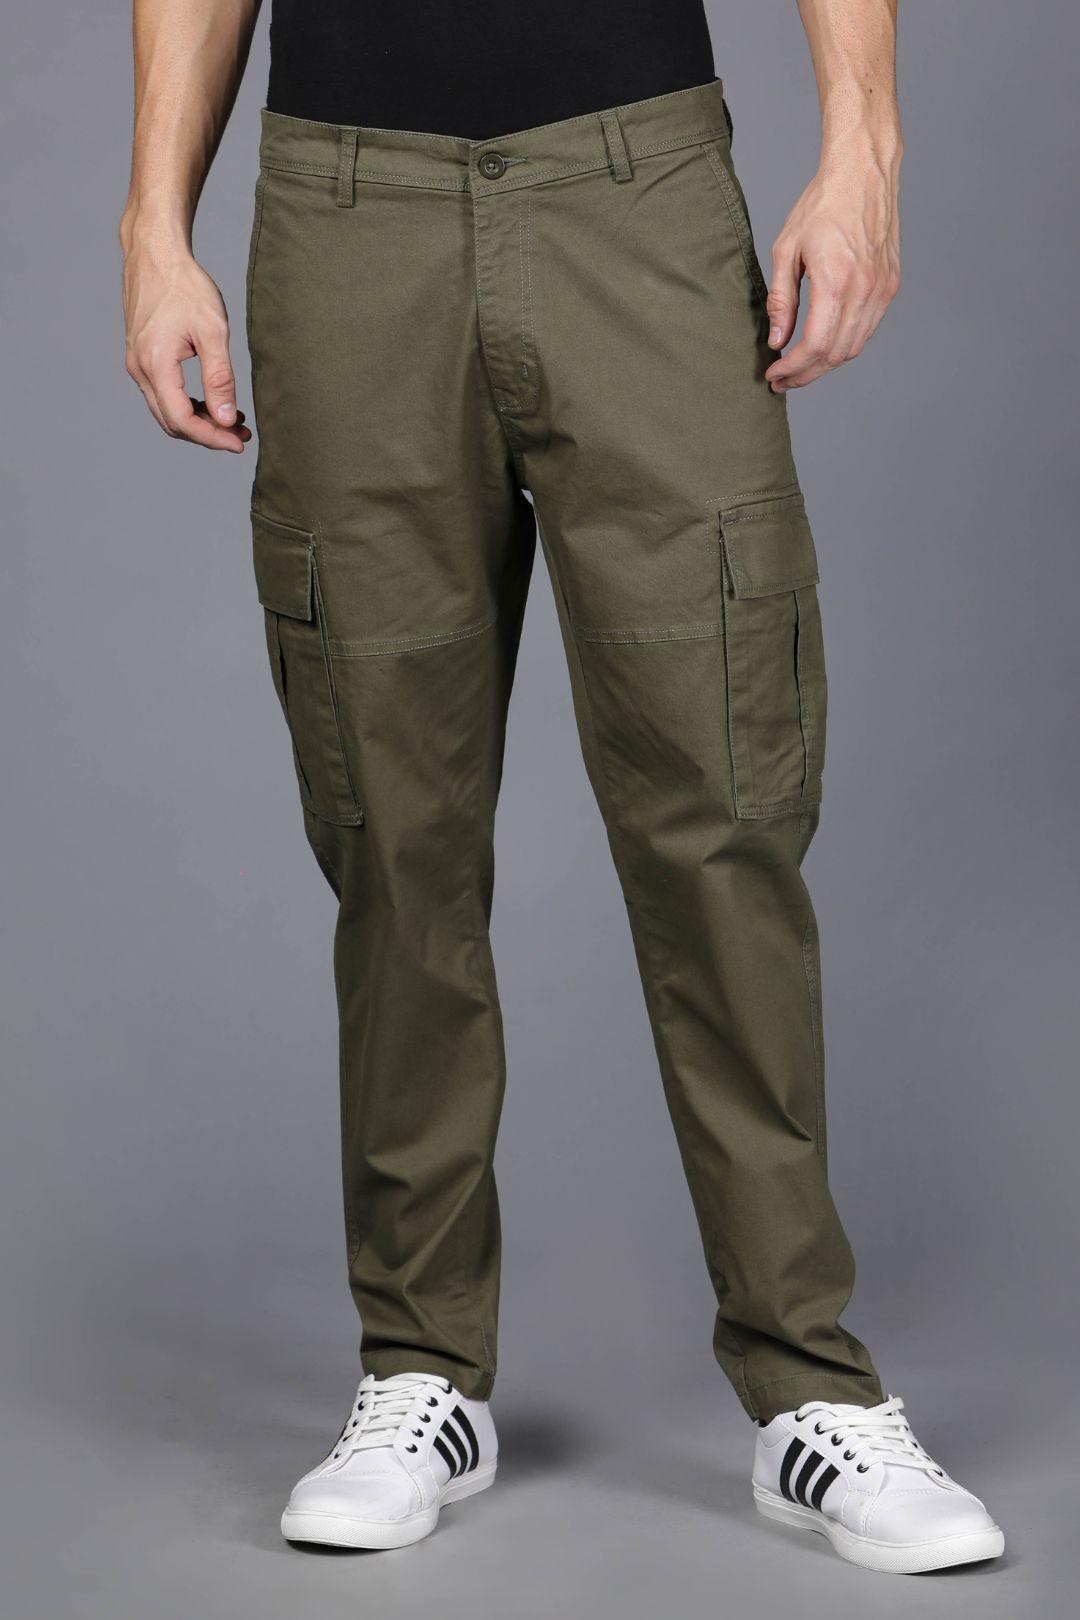 Steezy Pro Olive Green Cargo Pants  SNITCH